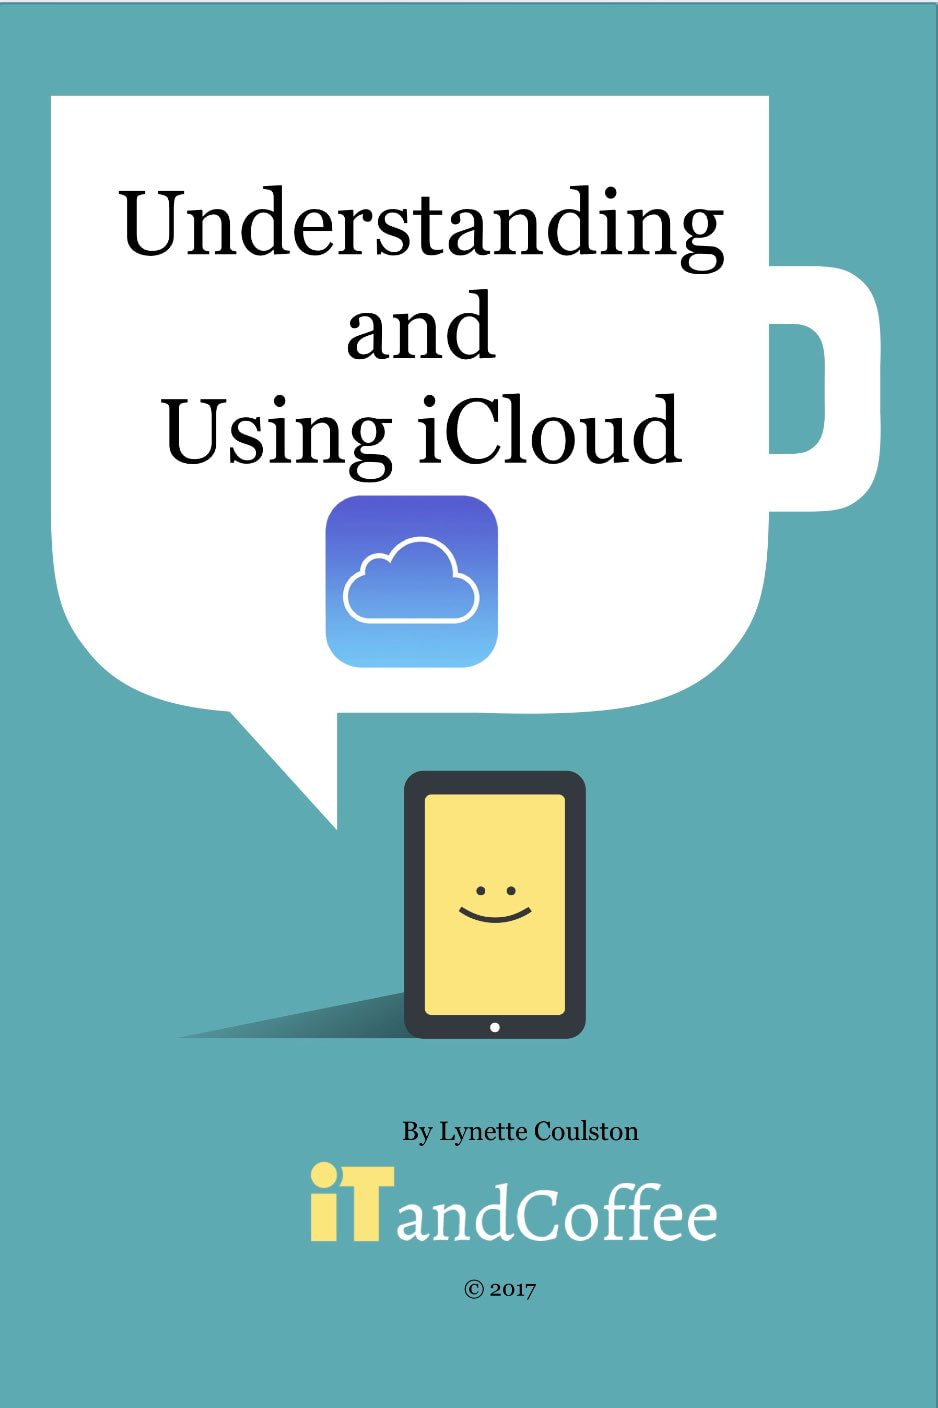 A guide to iCloud - comprehensive and easy to read